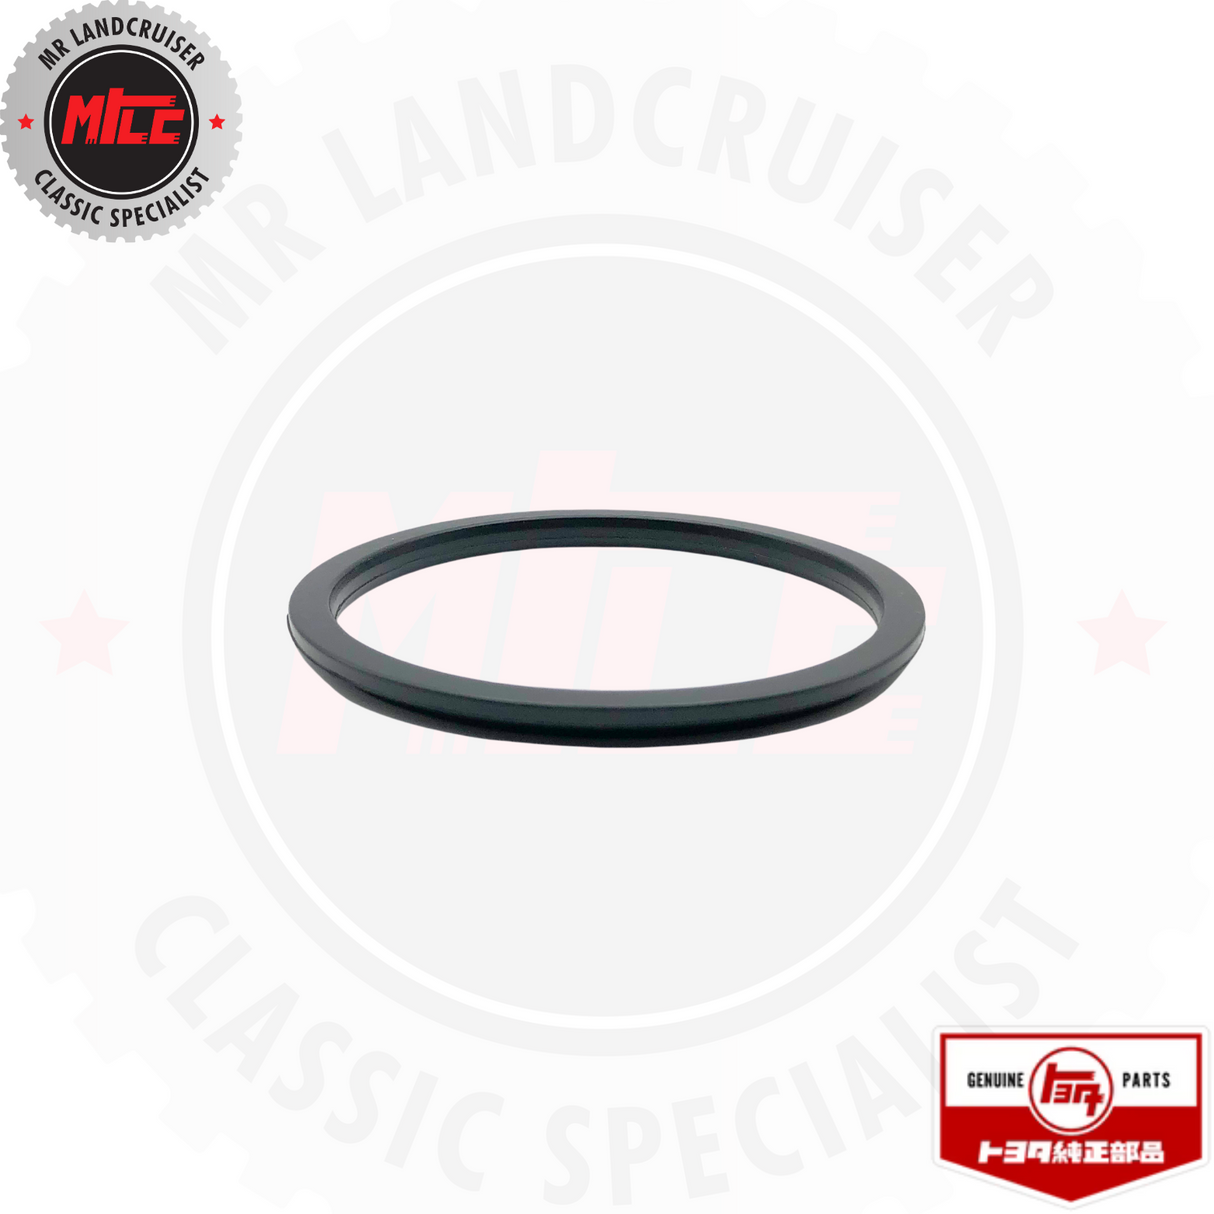 side view of Toyota Landcruiser OEM Air Cleaner to Carburettor Gasket 